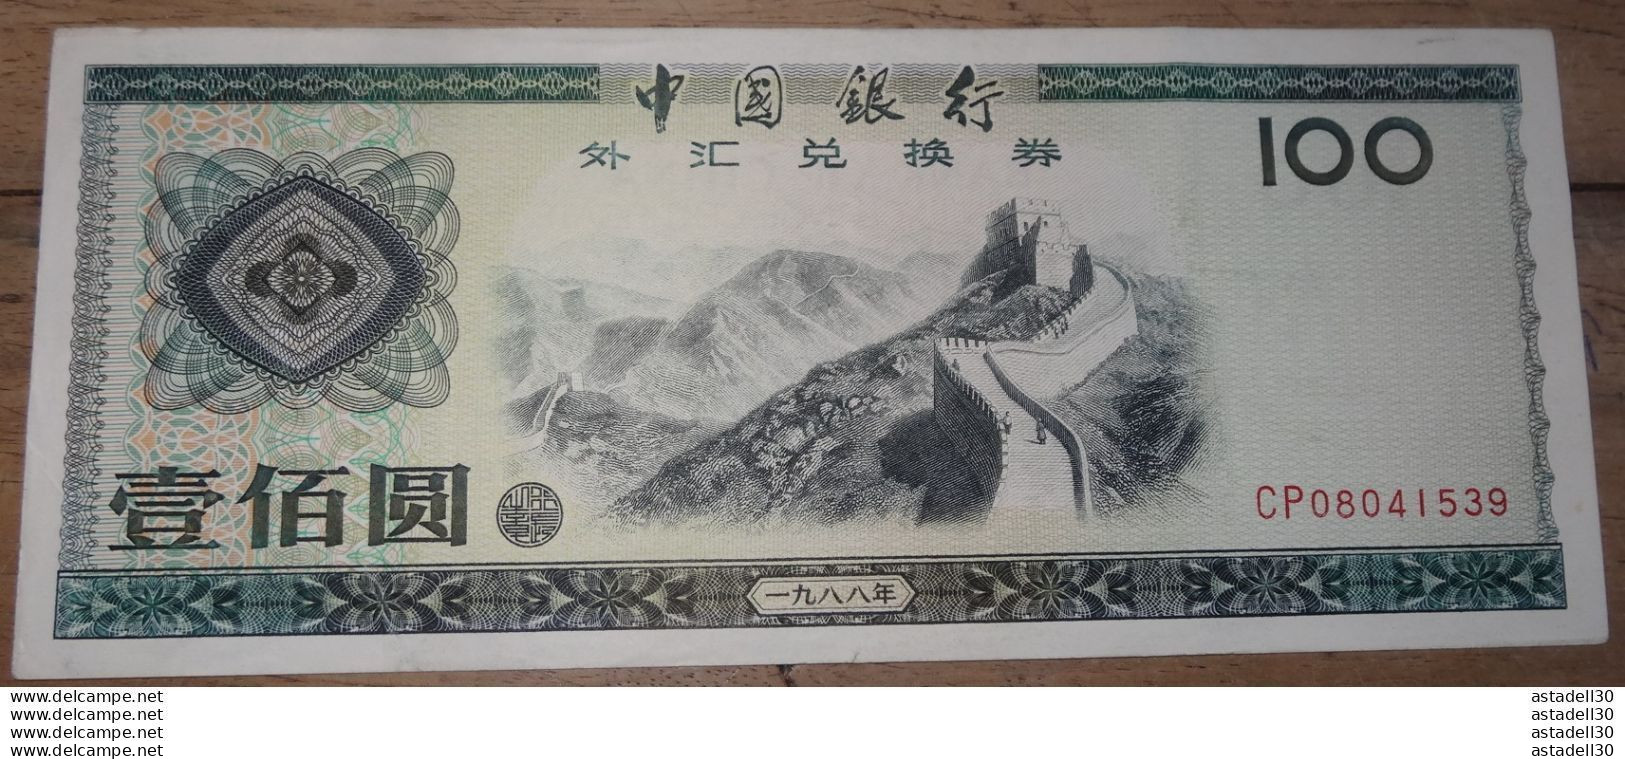 Rare CHINE CHINA 100 , One Hundred  Yuan, Foreign Exchange Certificate  ............. CL-10-4 - China